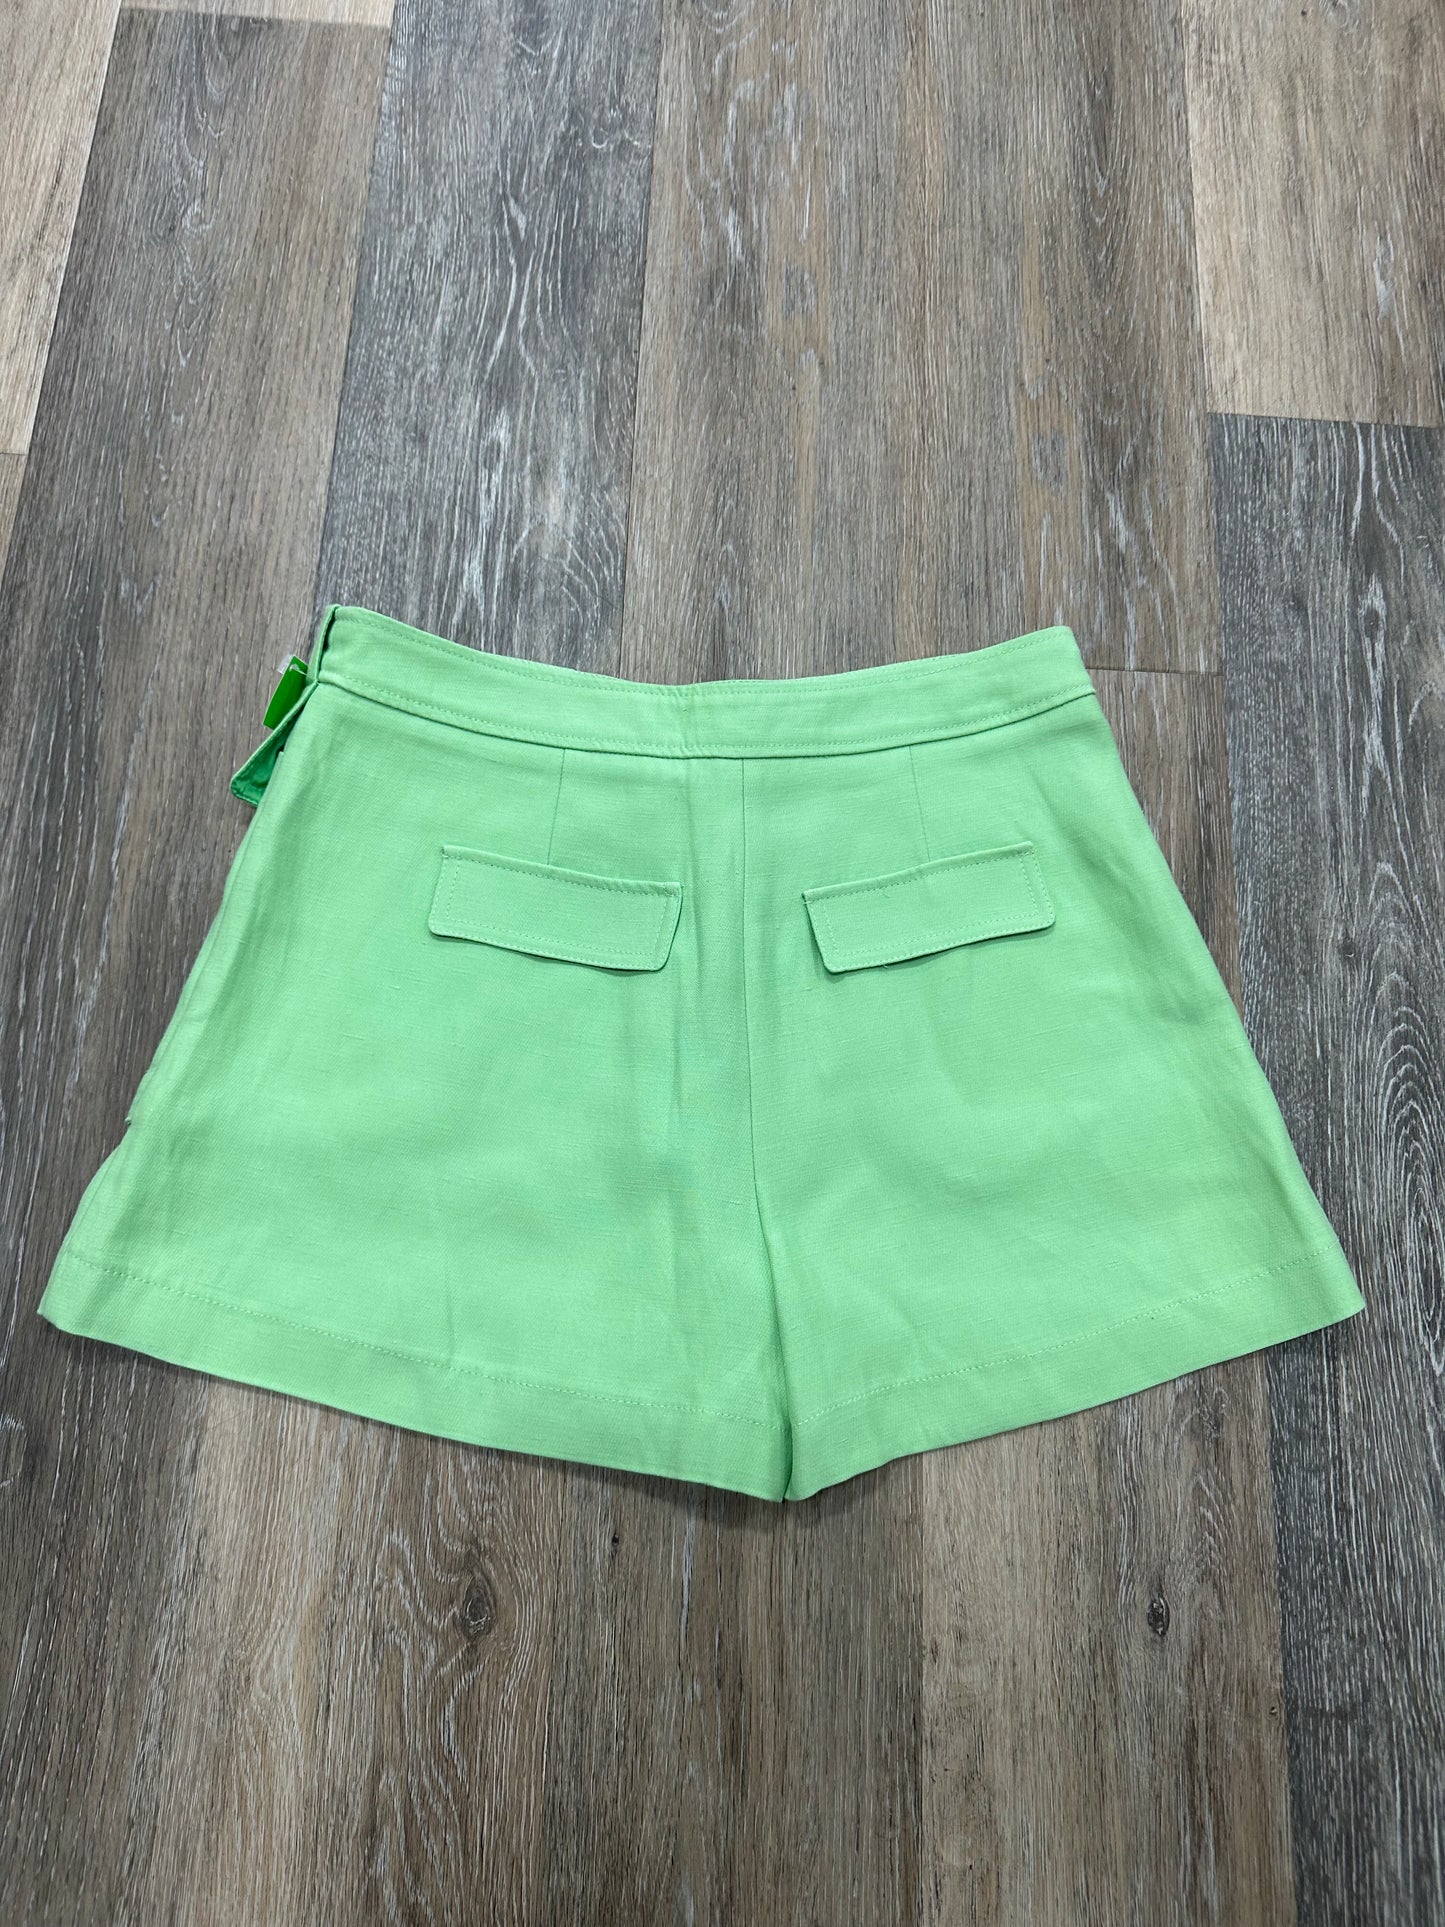 Shorts Designer By Alexis  Size: S